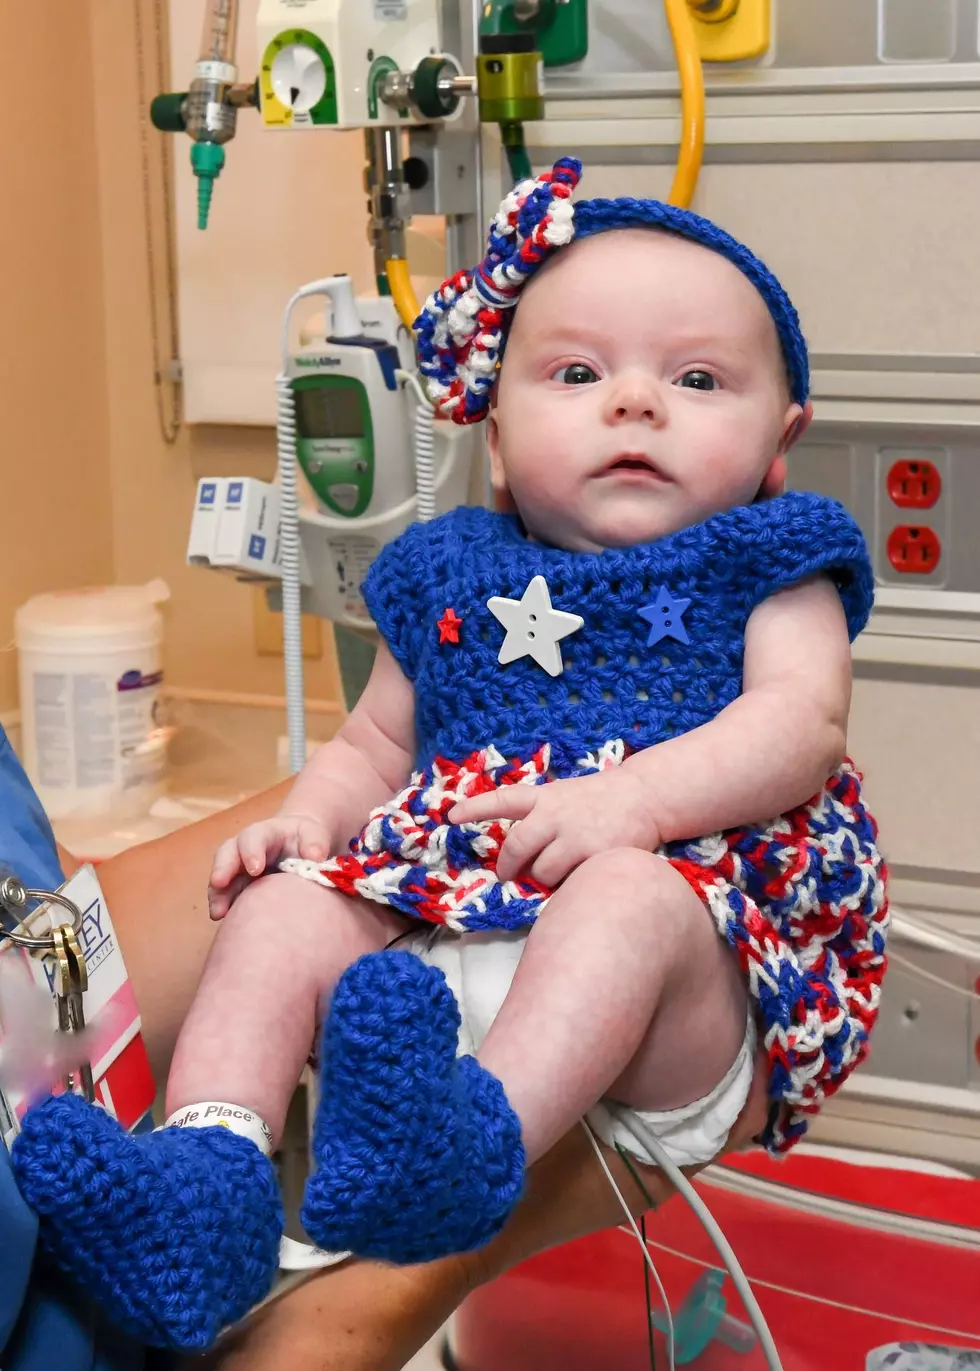 Hurley’s Tiniest Patients Show Off Their Red, White, & Blue [PHOTOS]